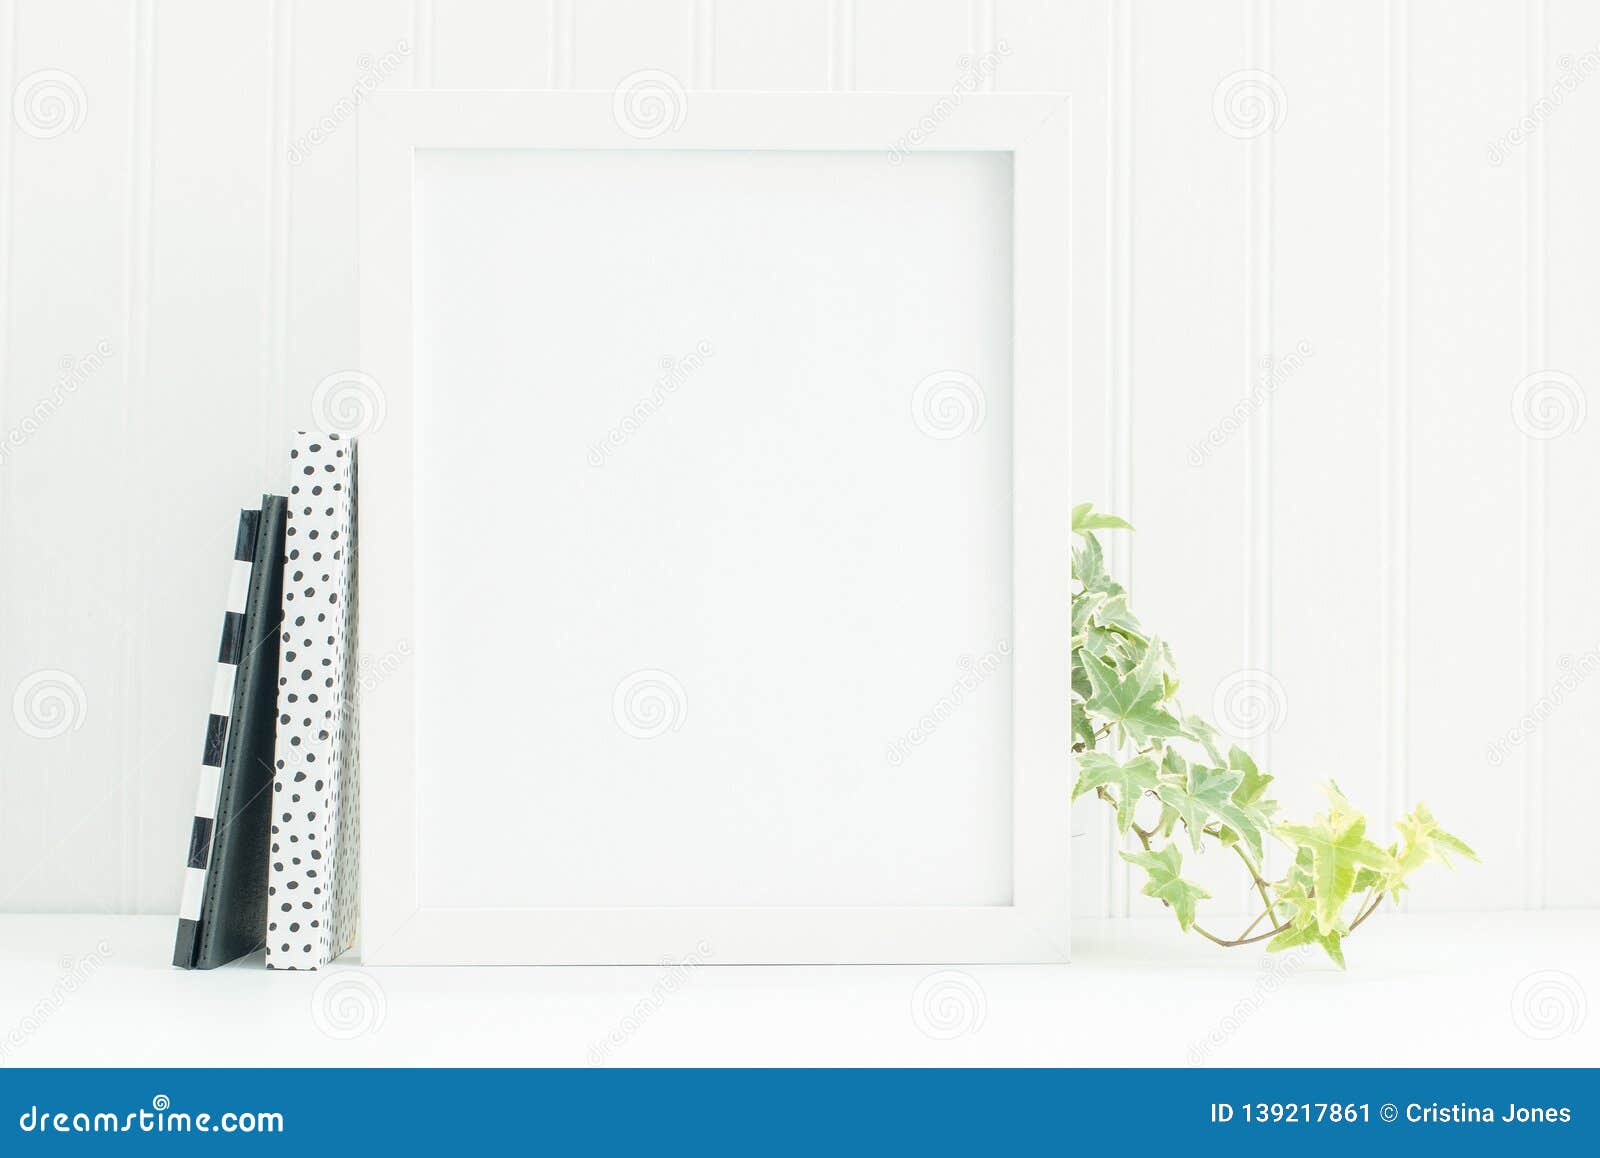 Download 8x10 White Frame Mockup With Black And White Notebooks And Ivy Stock Image Image Of Notebooks Design 139217861